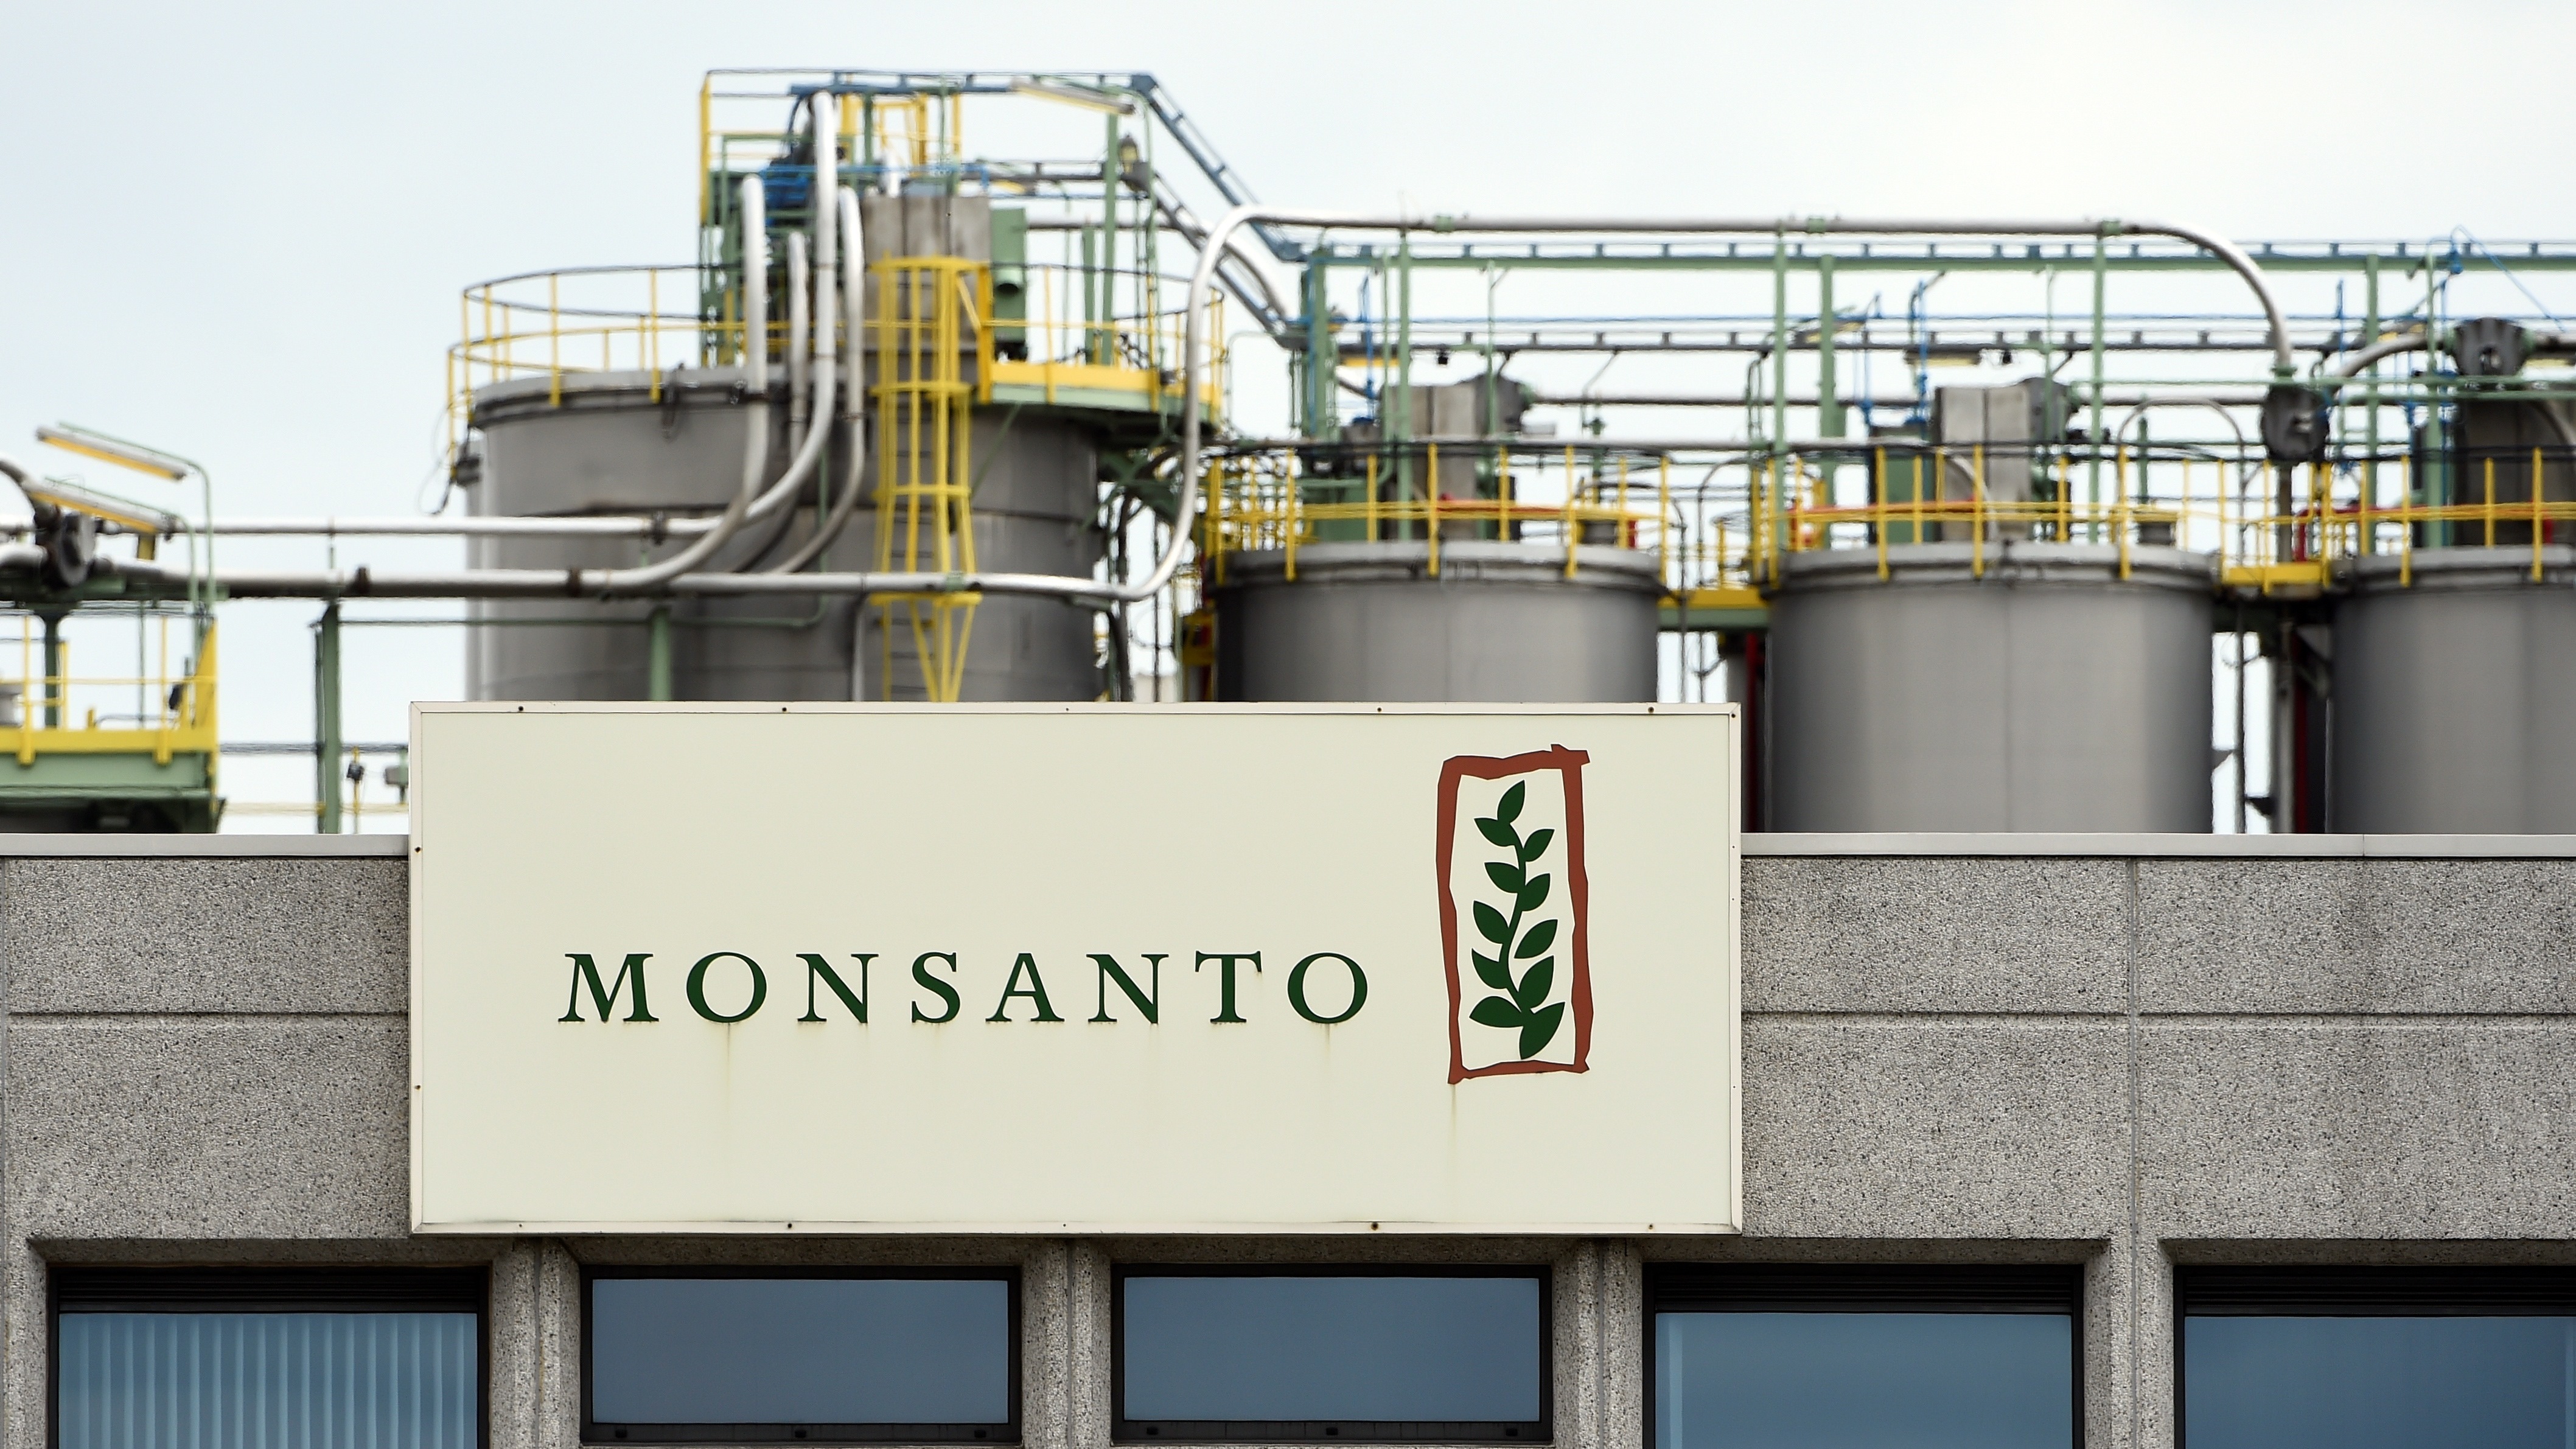 The Monsanto logo on a building at the firm Manufacturing Site and Operations Center near Antwerp, Belgium, on May 24. (Photo by John Thys/AFP/Getty Images)